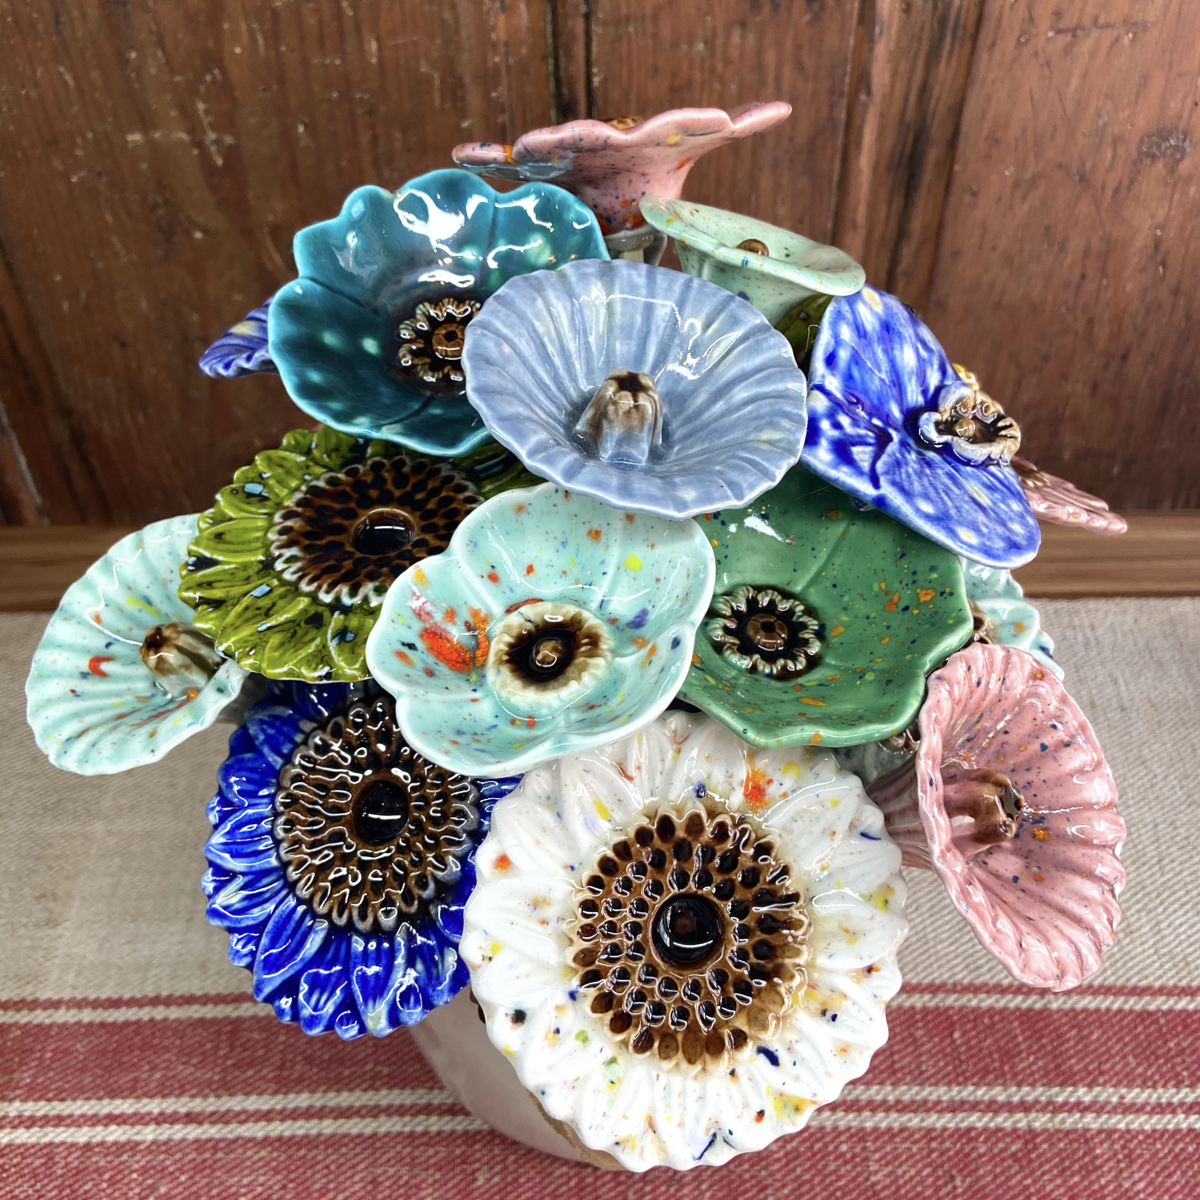 CERAMIC FLOWERS by Suuuper